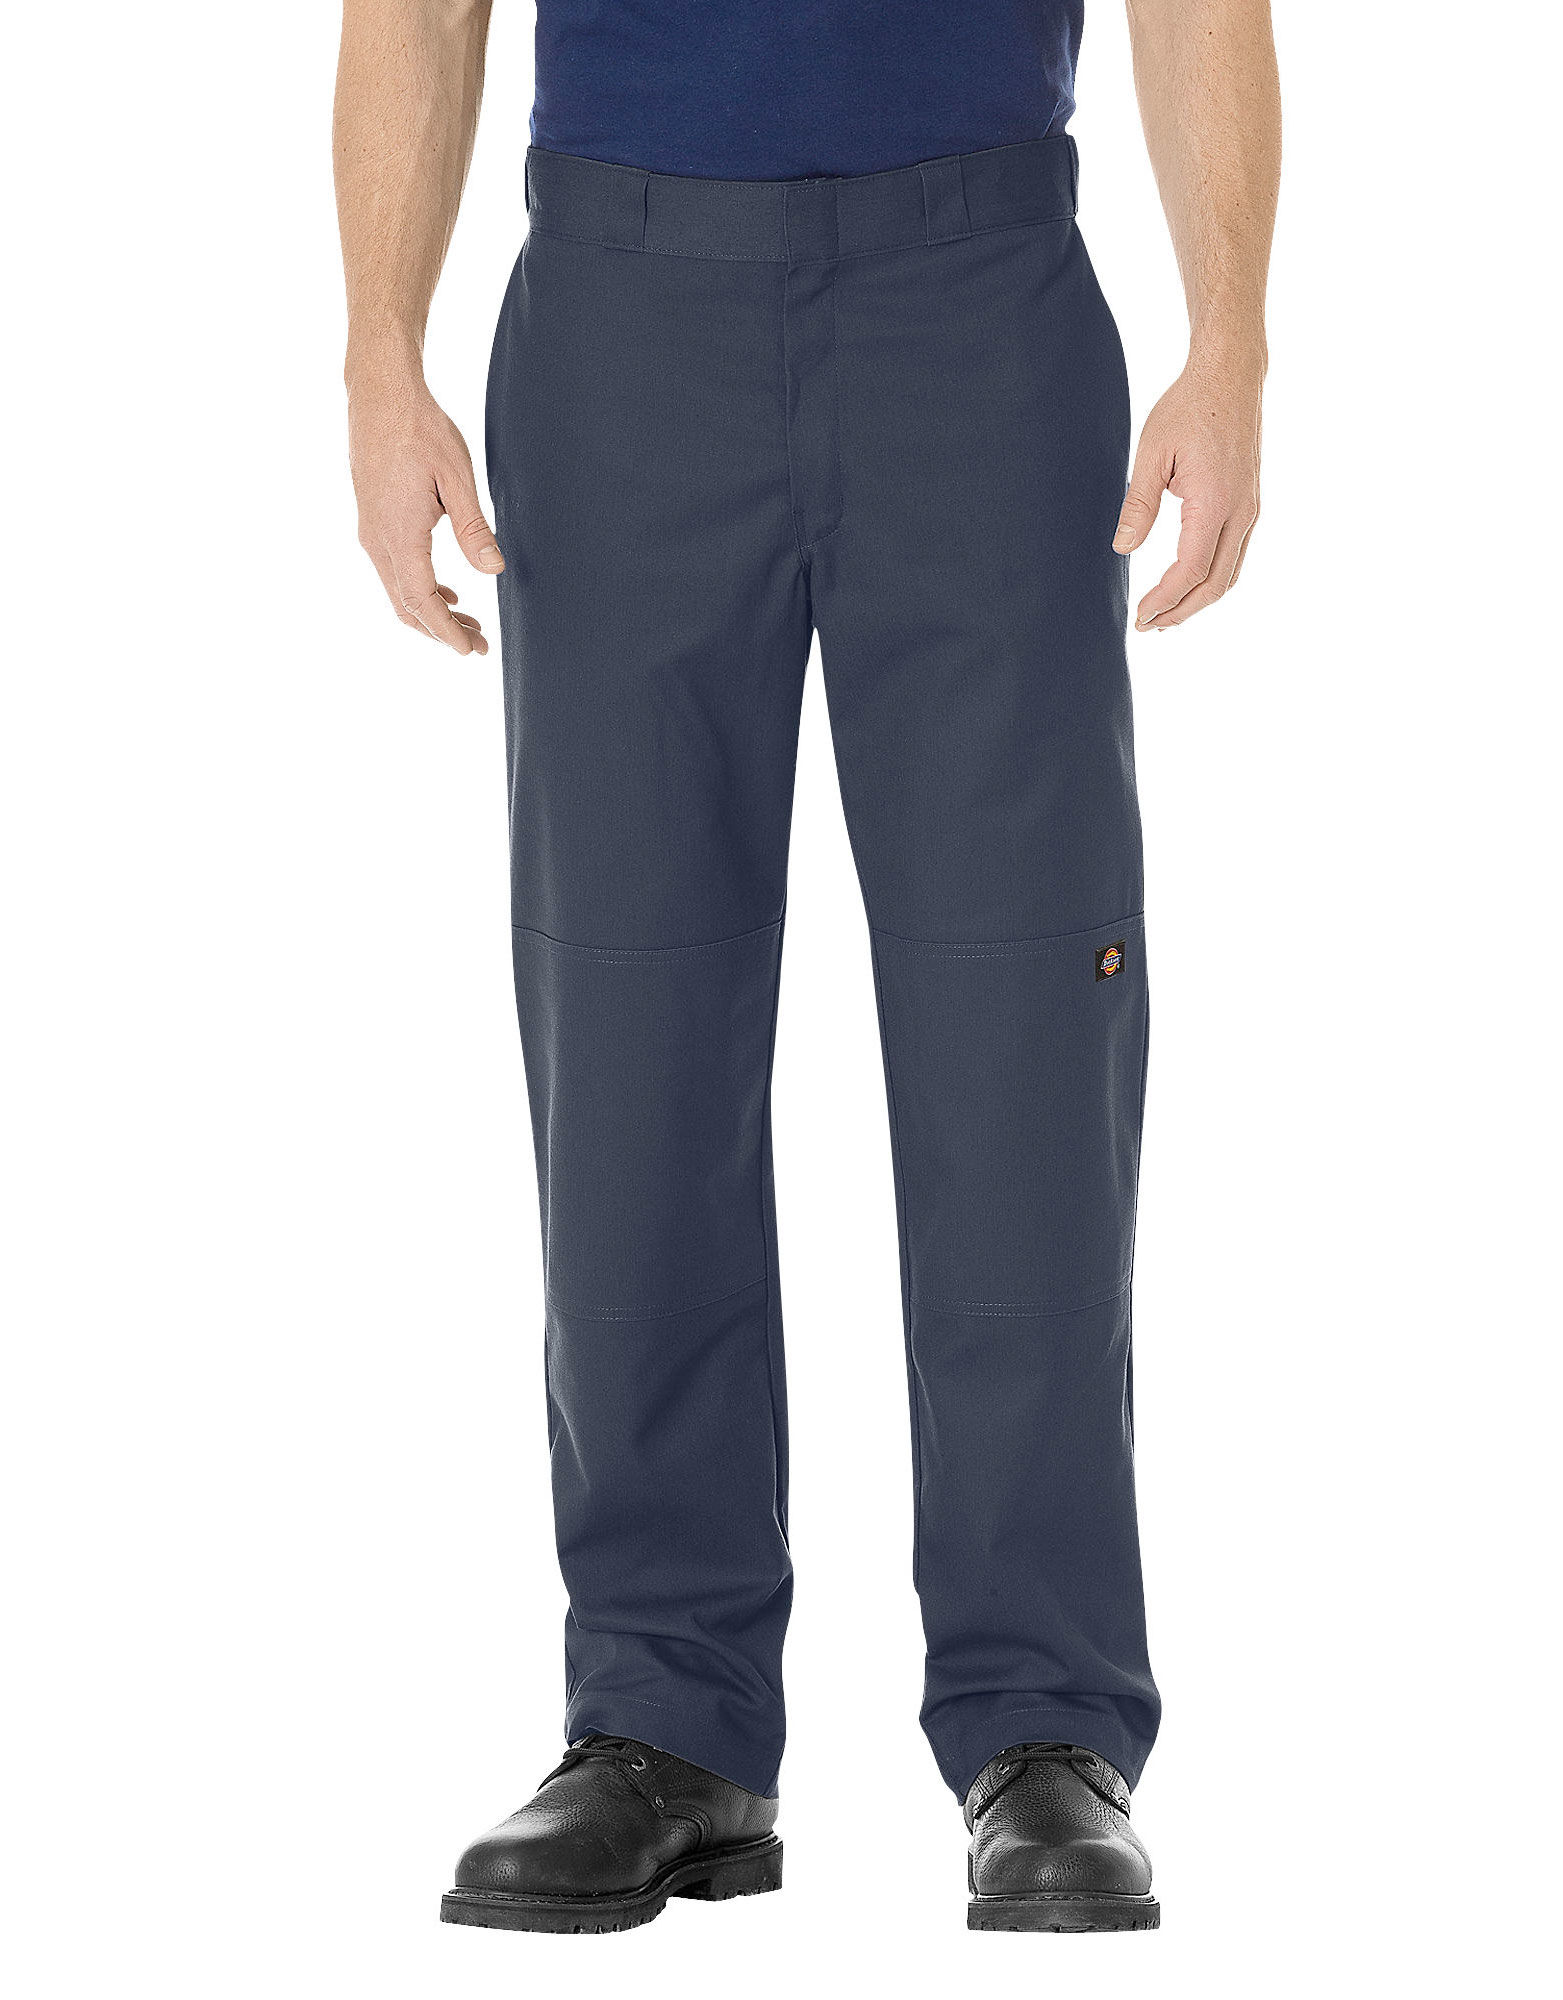 Dickies Men's Regular Straight Fit Double Knee Stretch Twill Work Pant